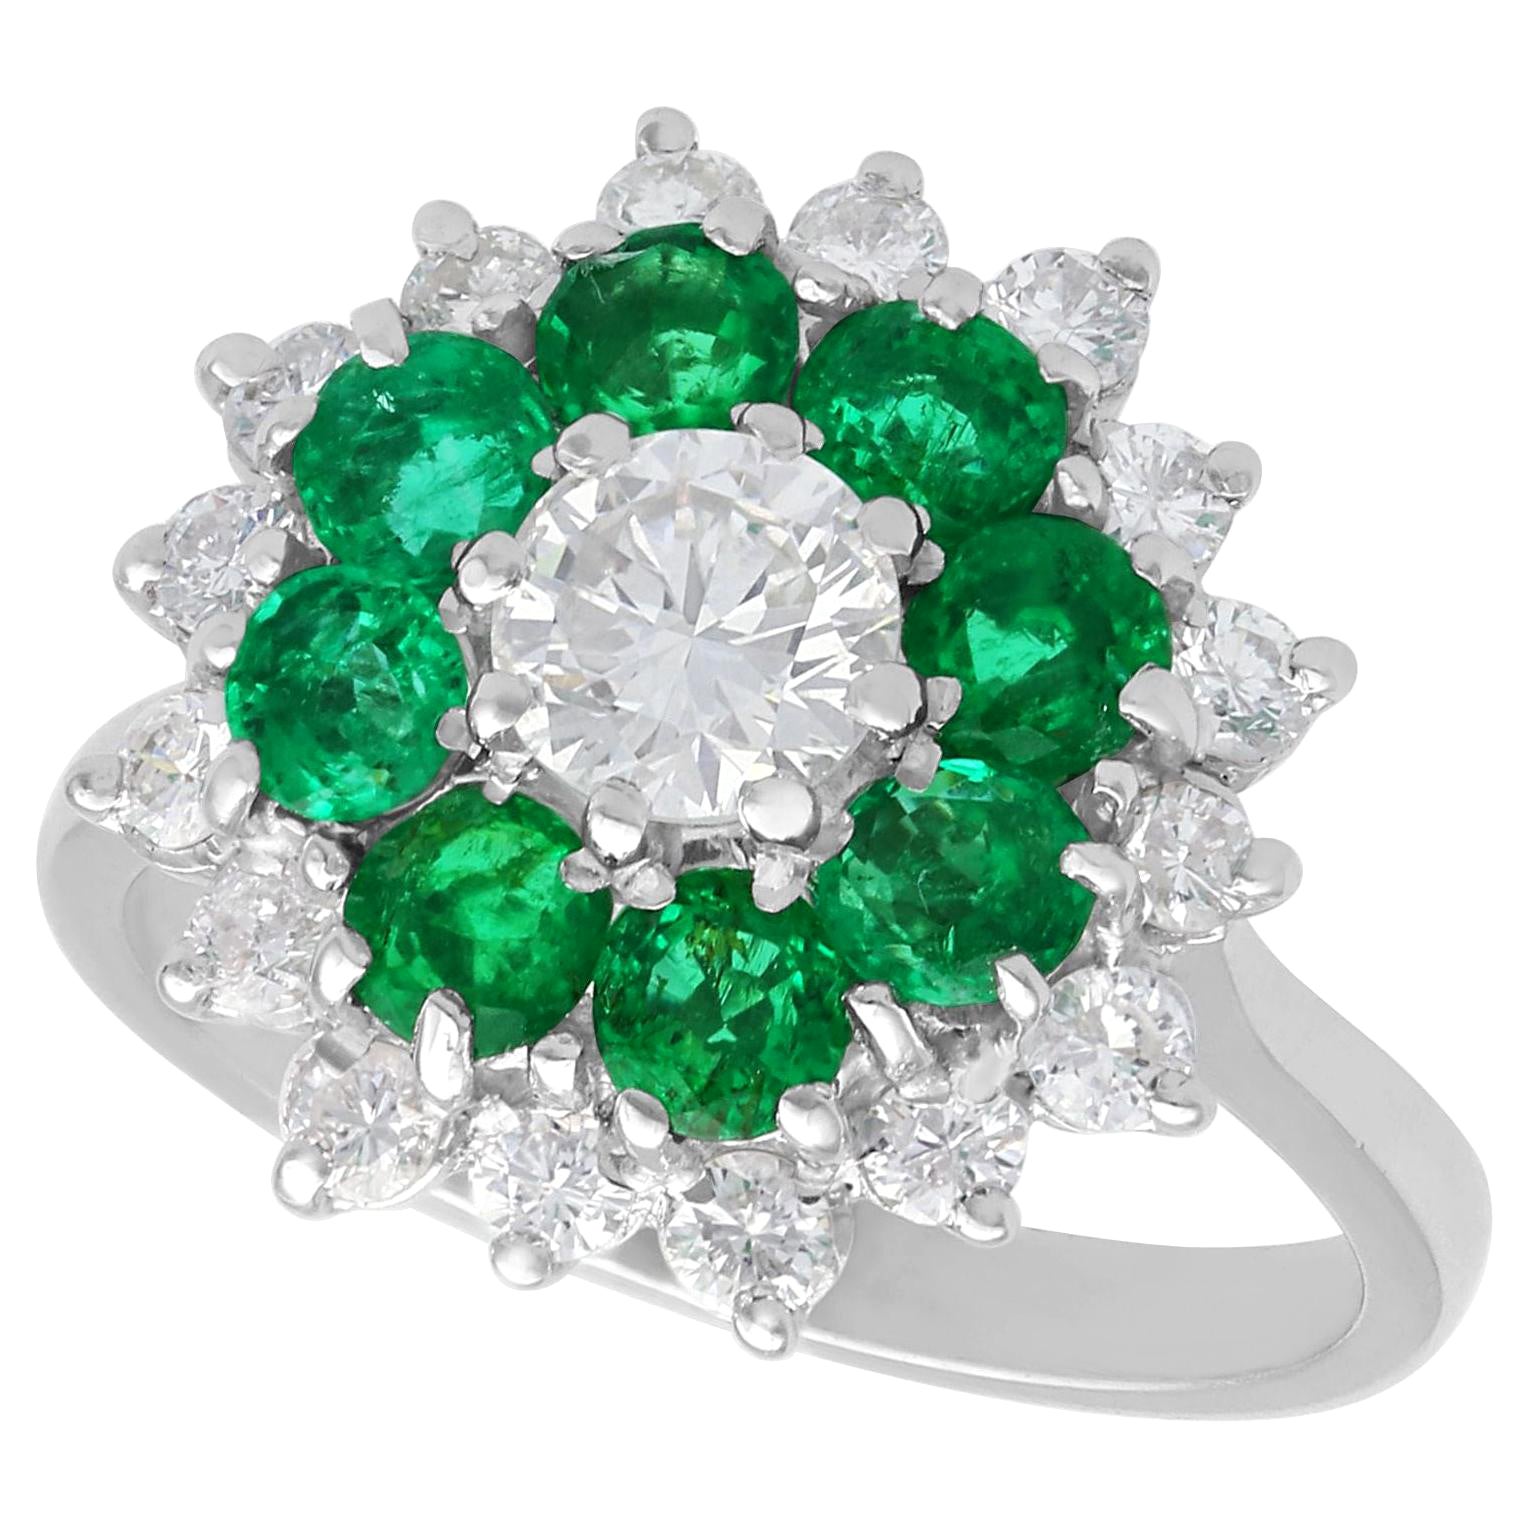 Vintage 1.23 Carat Diamond and Emerald White Gold Cocktail Ring, Circa 1970 For Sale